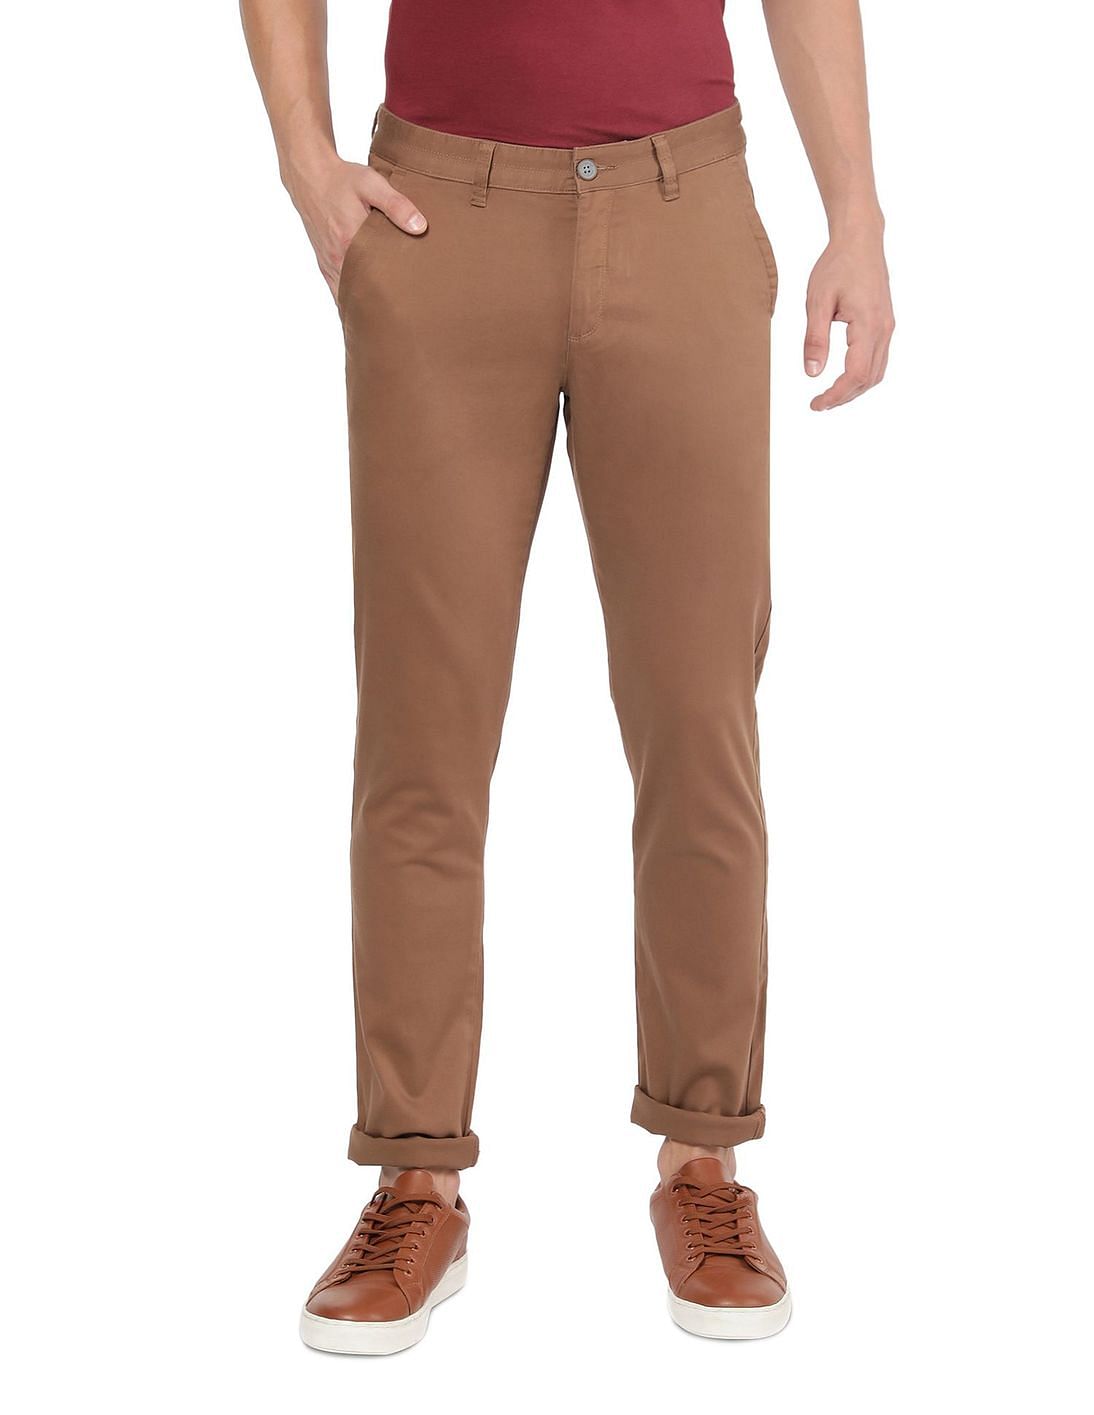 Buy AD by Arvind Modern Slim Fit Solid Chinos - NNNOW.com